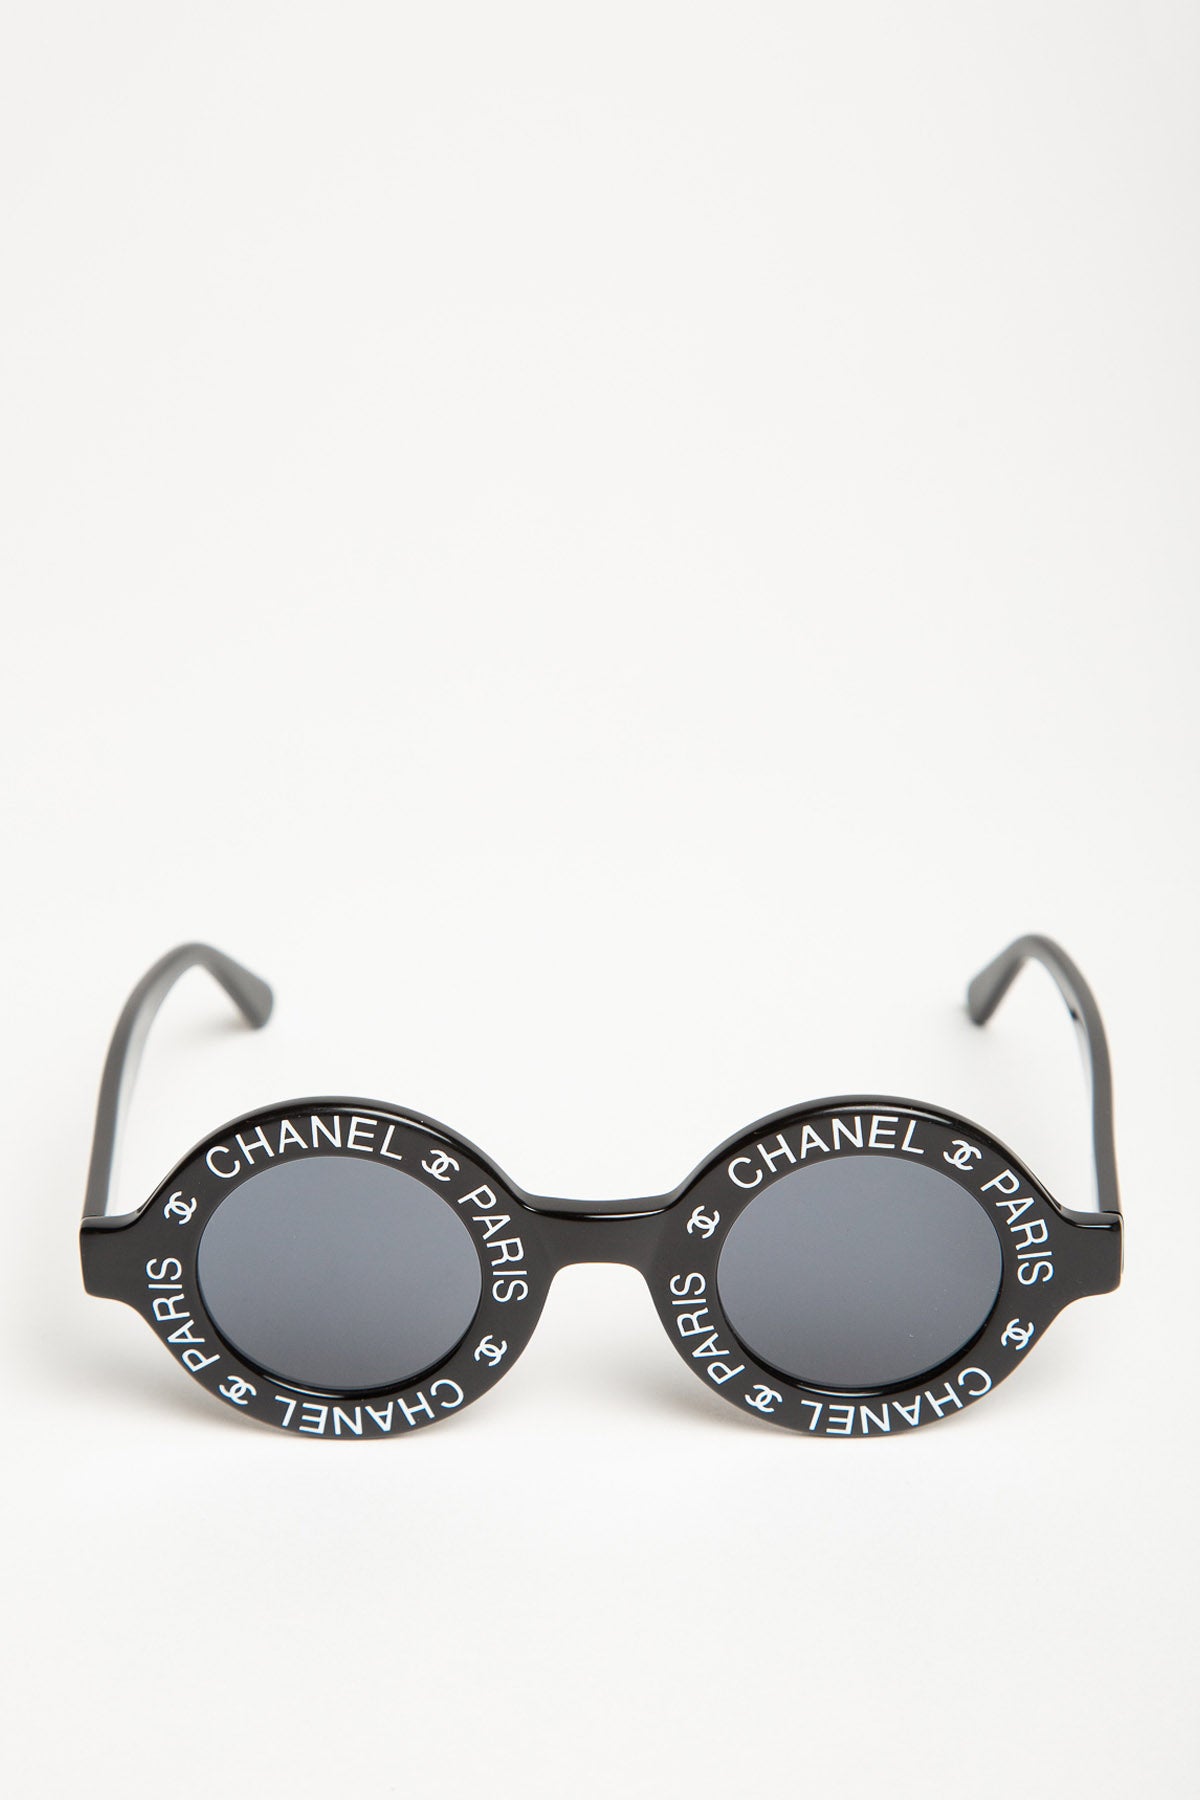 The Vintage Trap Pre-loved 90s Chanel Fl99 Round-frame Acetate